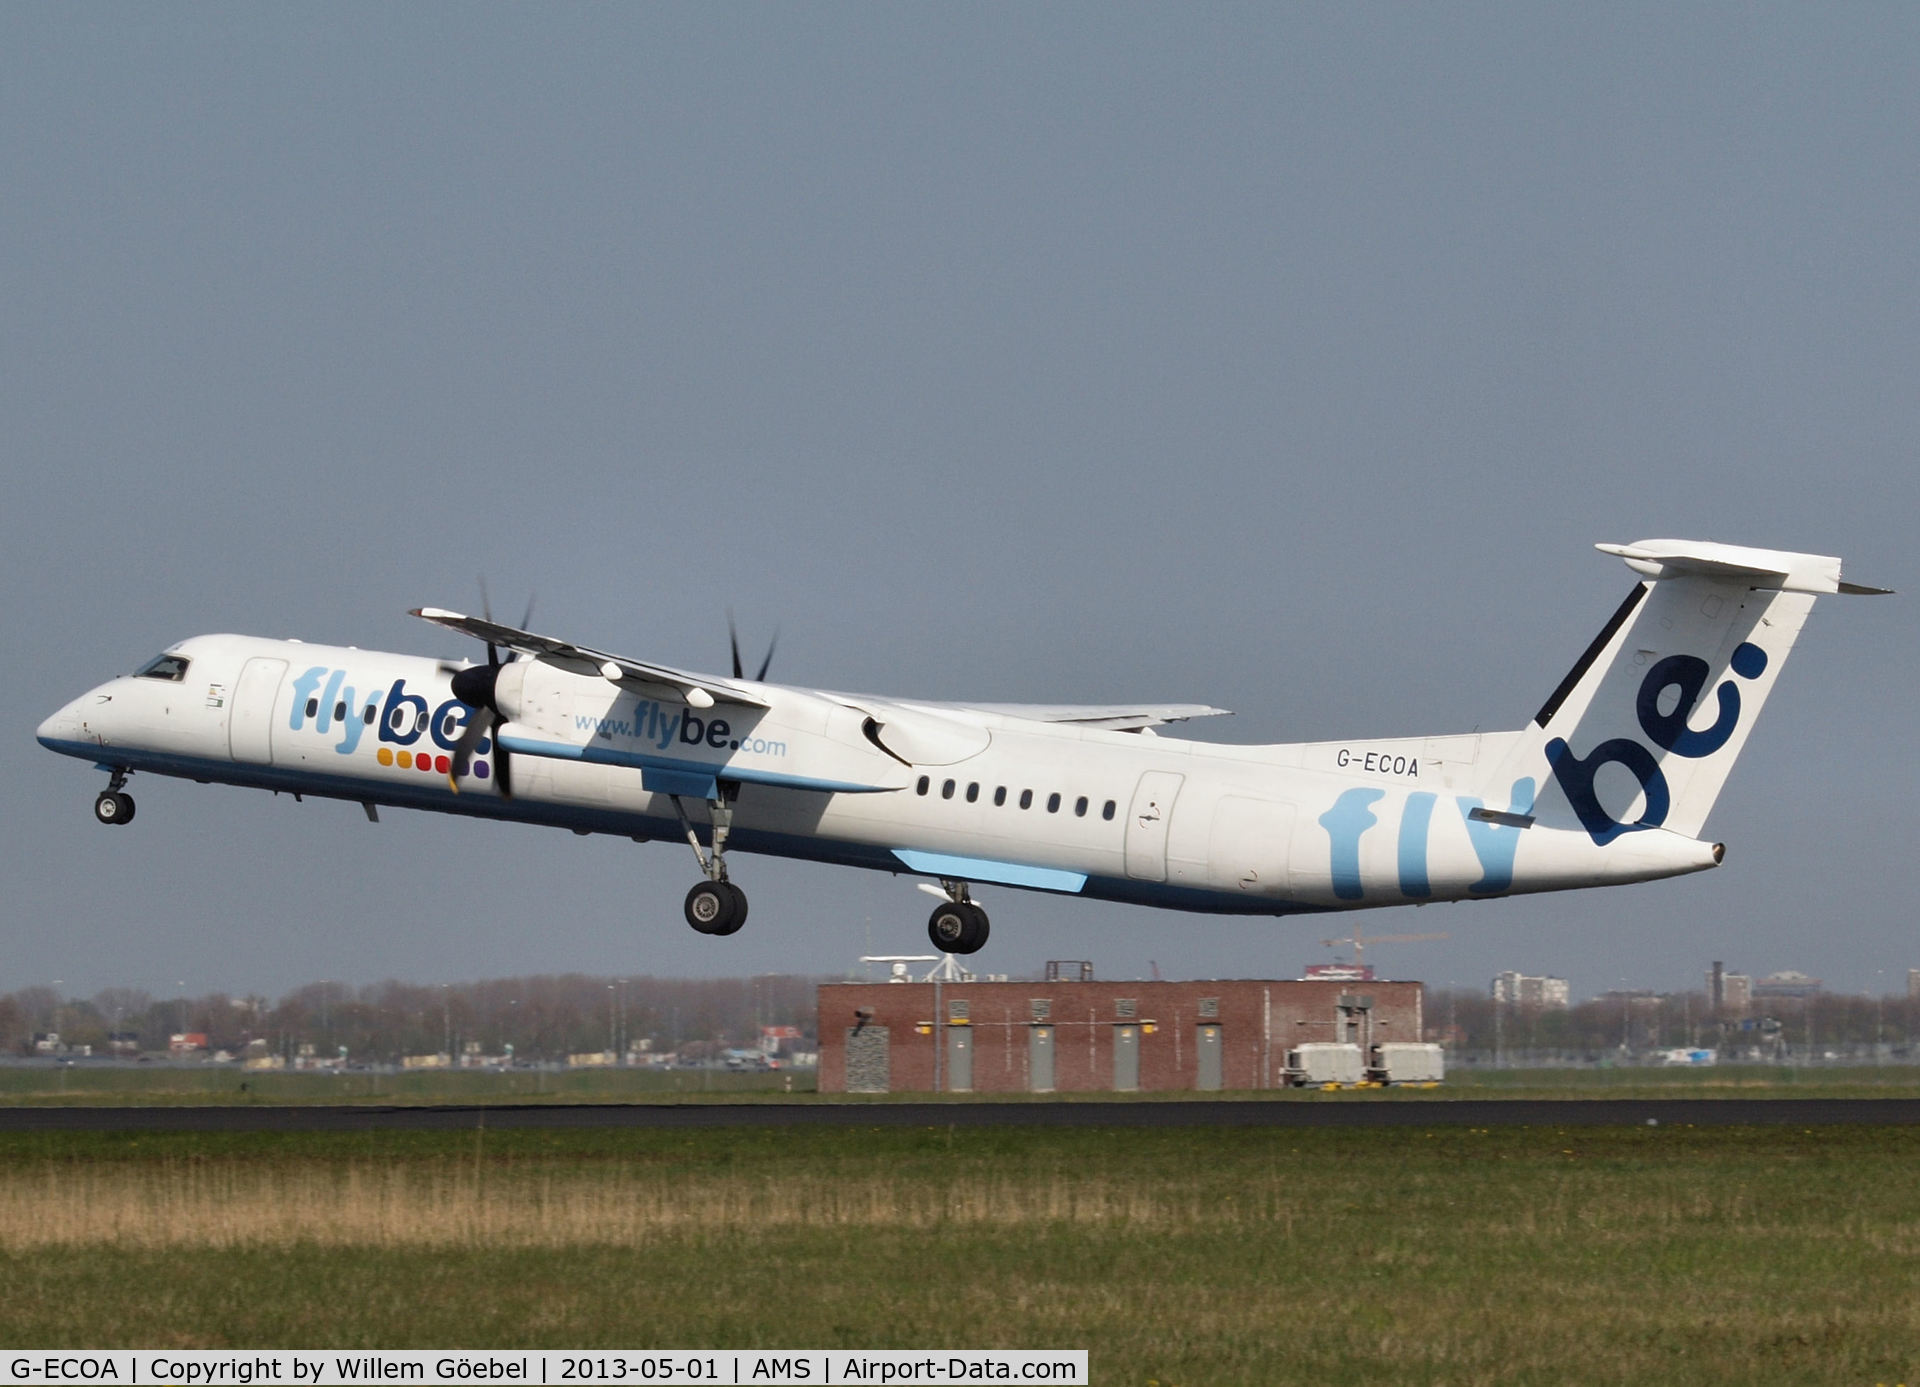 G-ECOA, 2007 De Havilland Canada DHC-8-402Q Dash 8 C/N 4180, Take off from runway 36L of Schiphol Airport